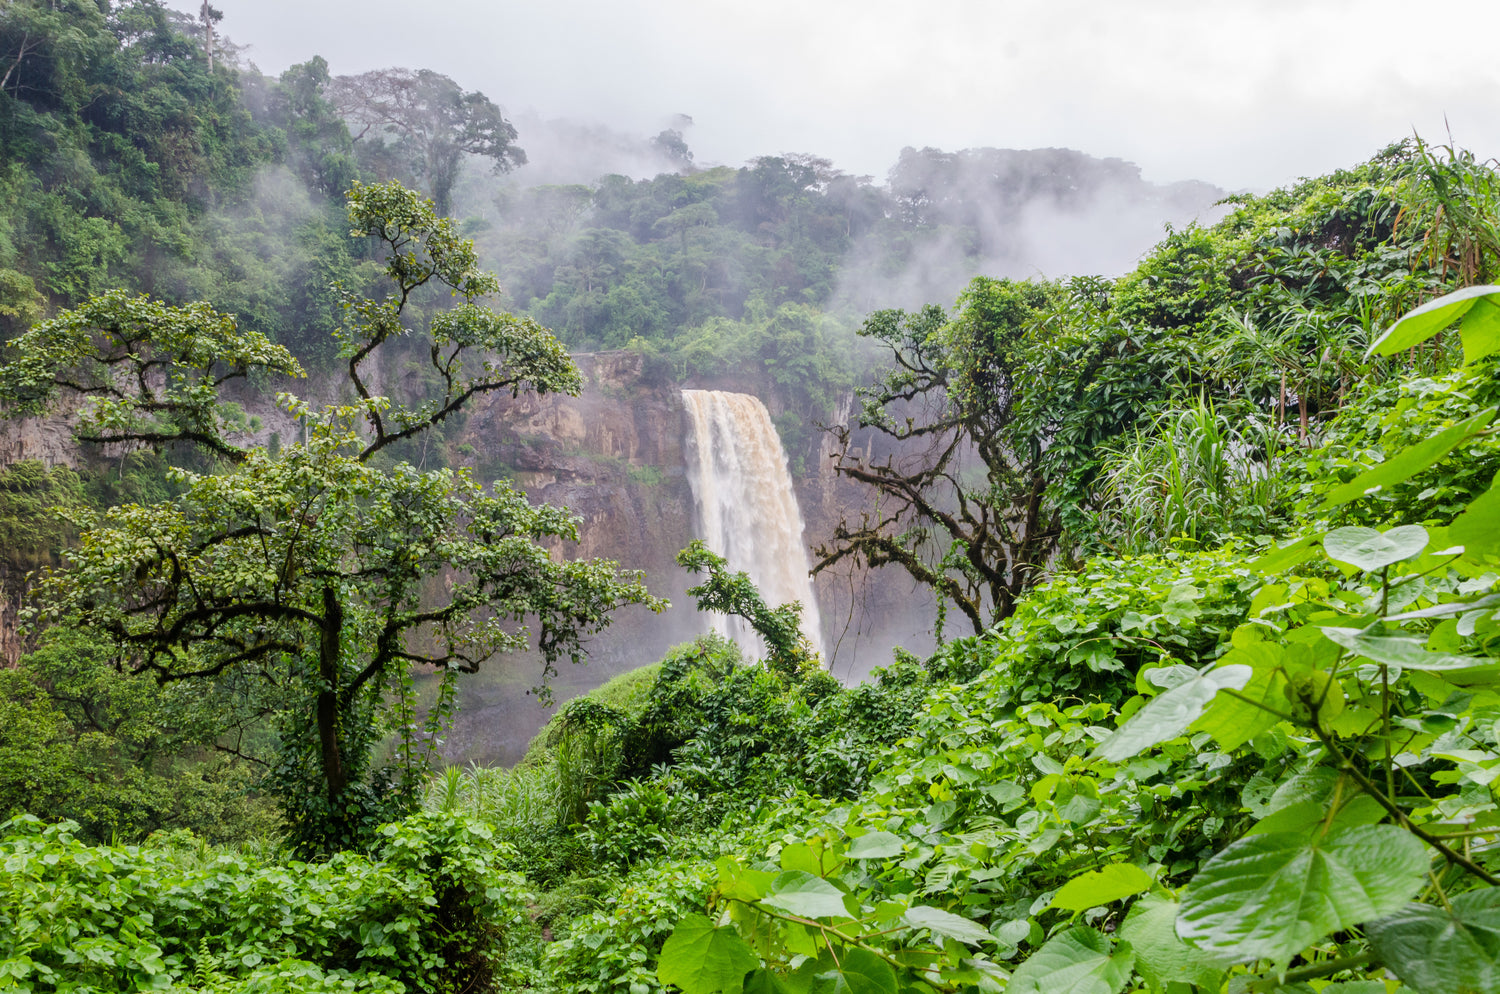 The image shows a tropical rainforest or jungle with a waterfall in the background. Clouds of mist are billowing up, framing the mountainous, tree-covered background.